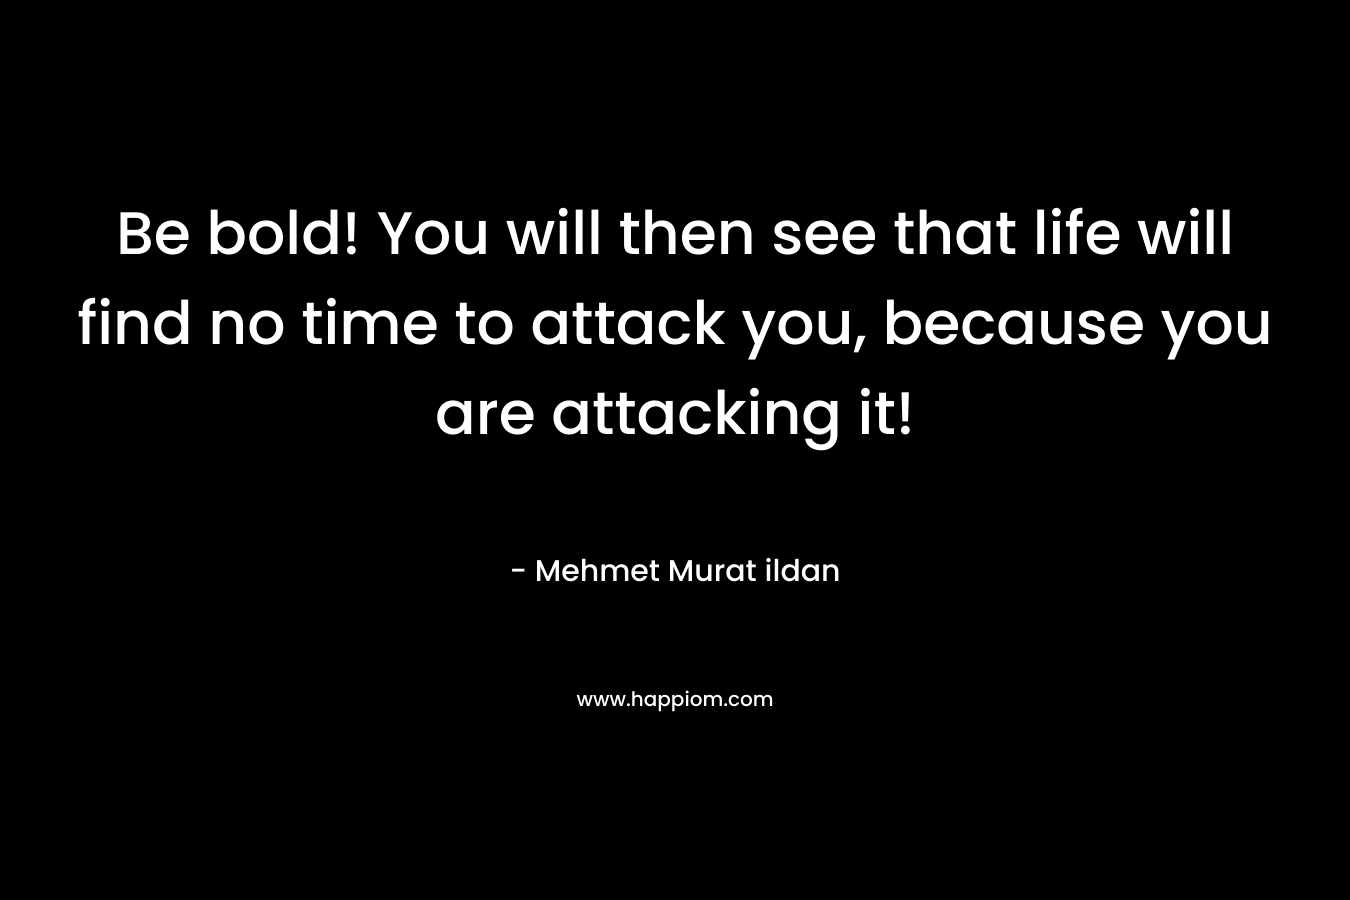 Be bold! You will then see that life will find no time to attack you, because you are attacking it! – Mehmet Murat ildan